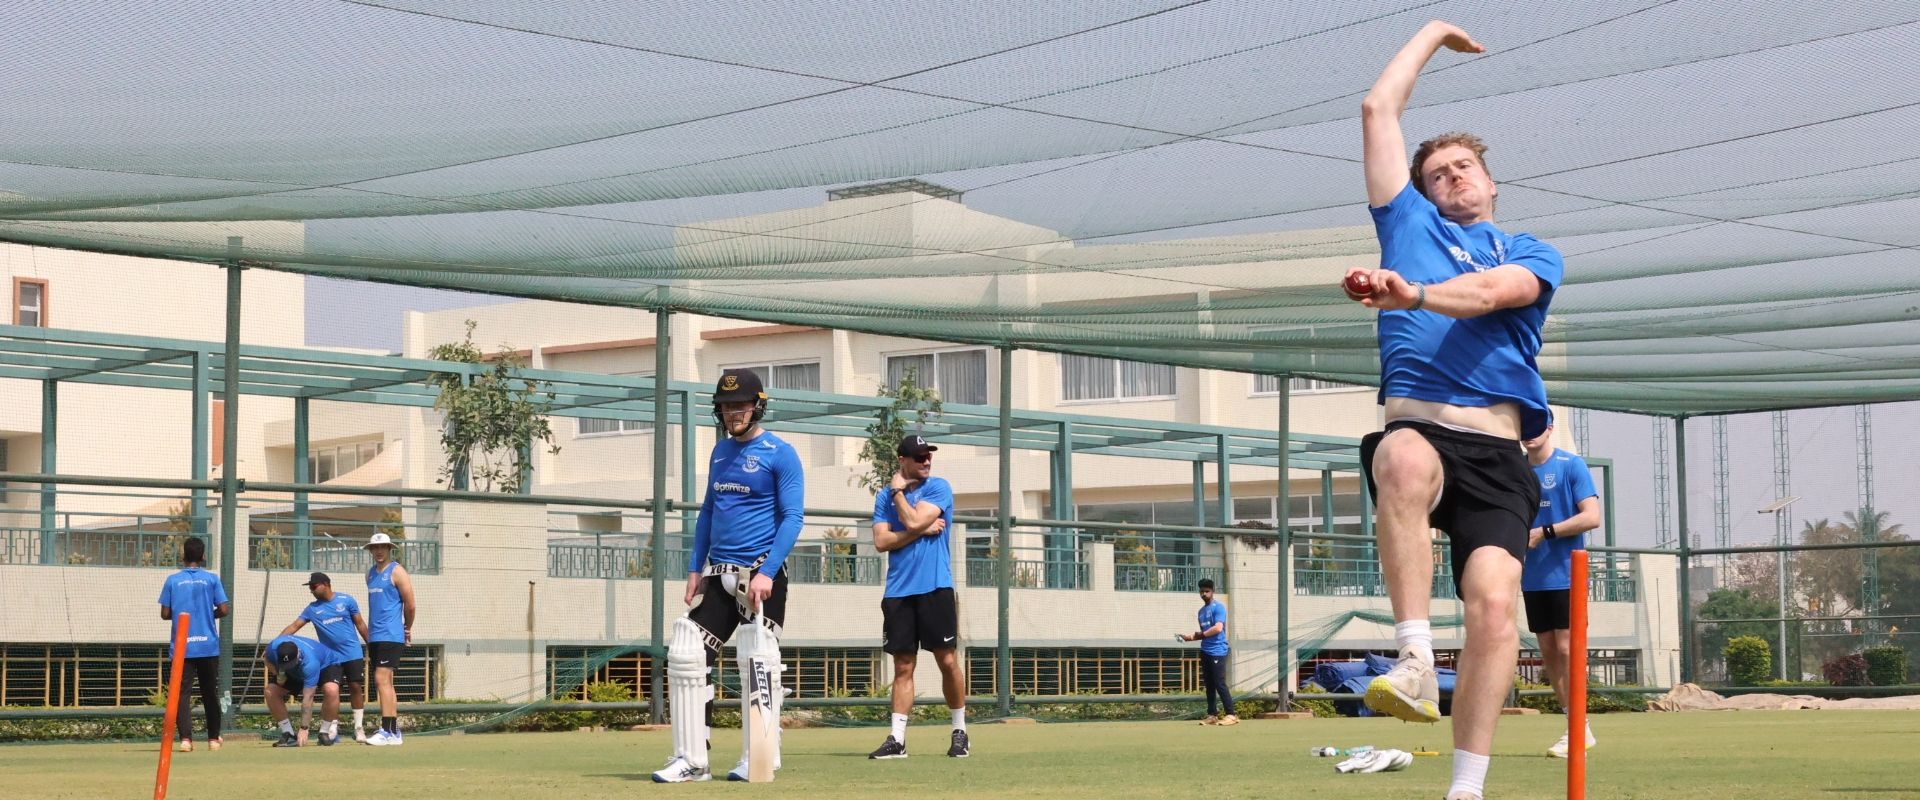 Sean Hunt warming up in India